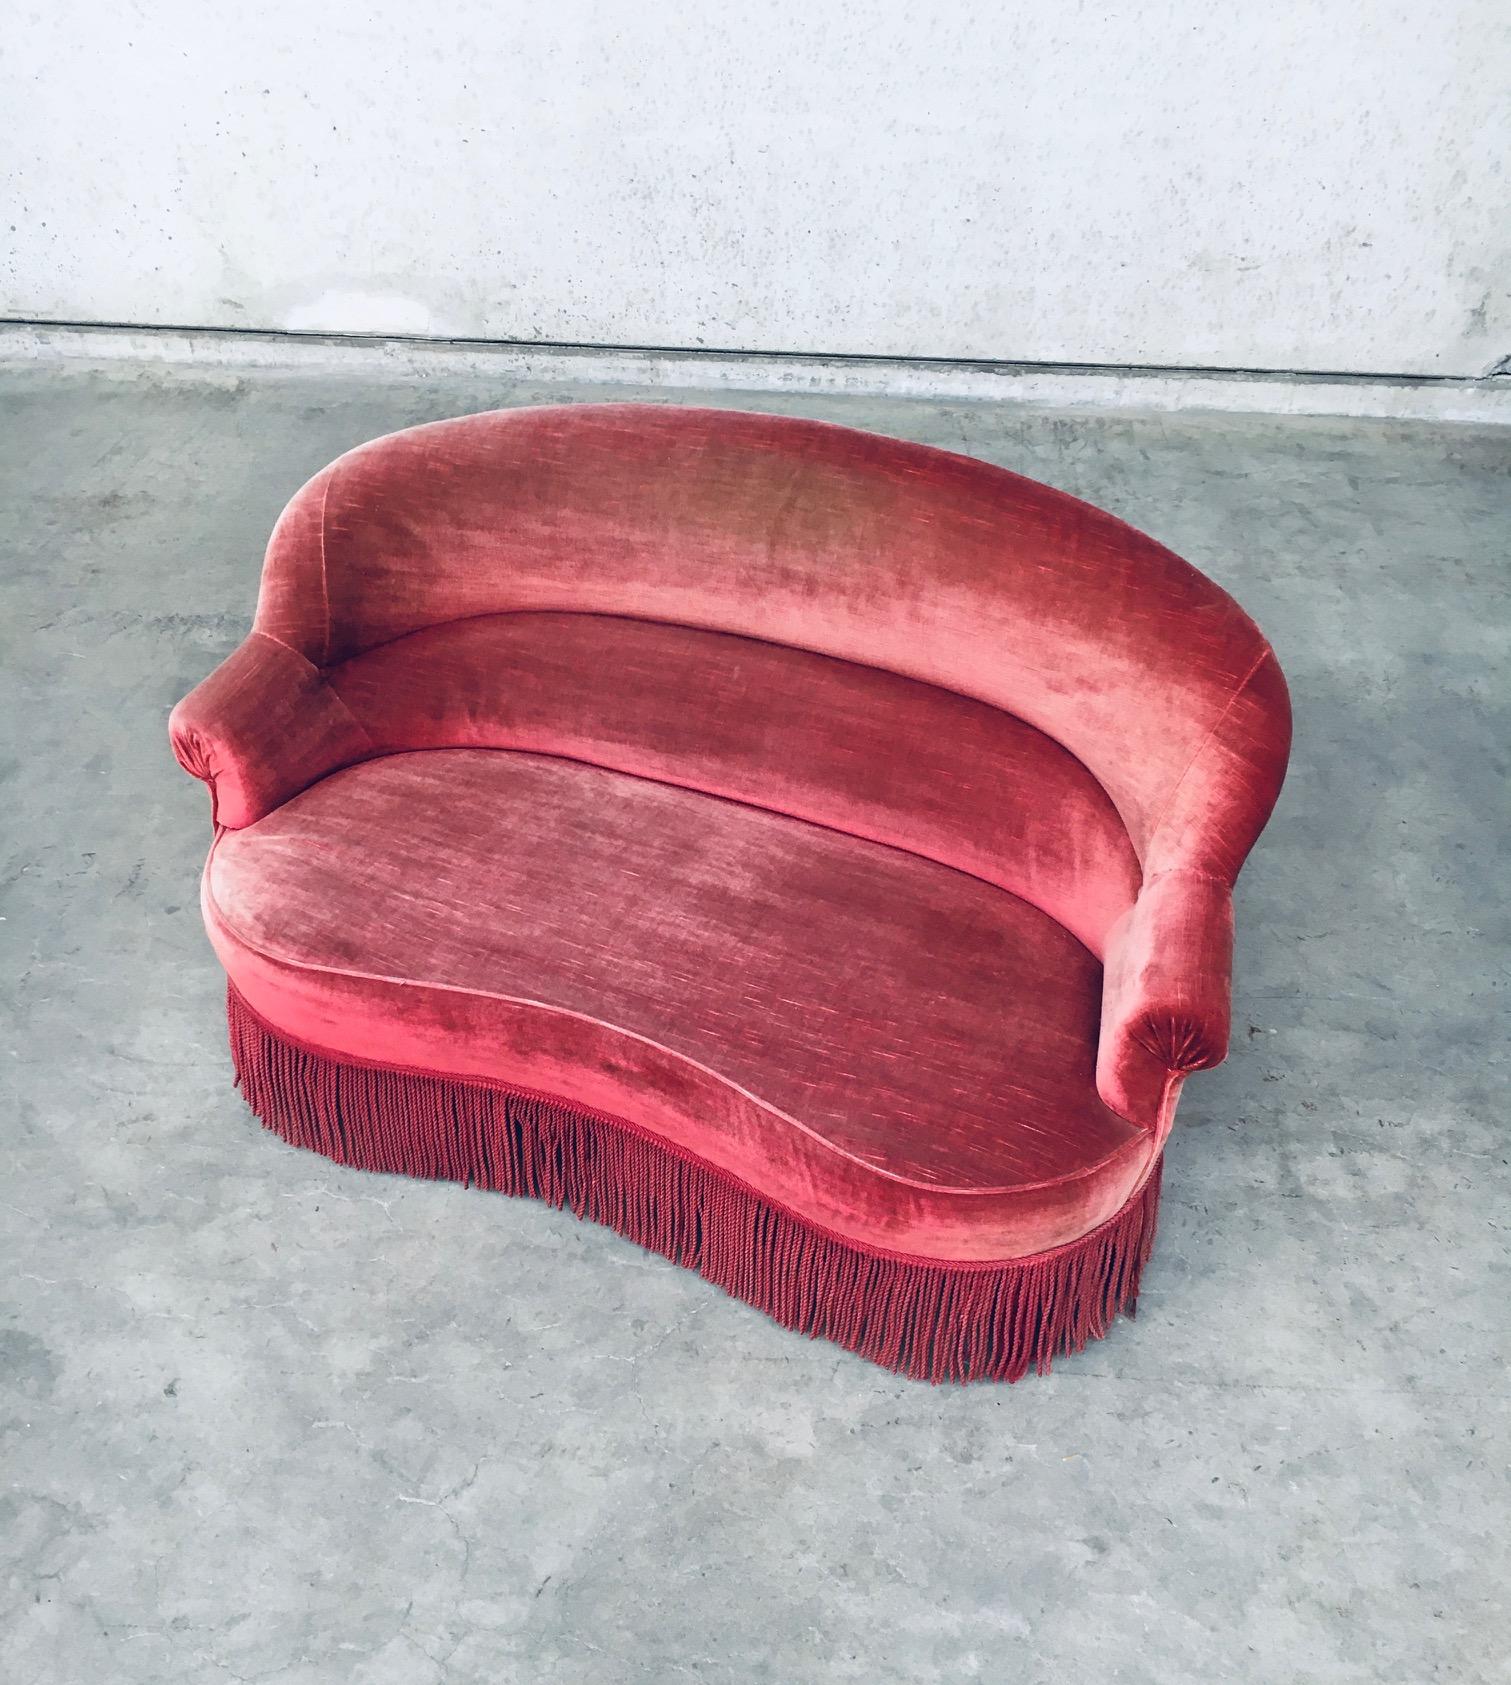 Vintage mid-century Design Hollywood Regency style velvet 2 seat loveseat sofa with fringe in red / pink, made in Belgium 1950's. In the style of the 1920's / 30's boudoir sofa seats. Curved back and seat. Feet are also covered in velvet fabric. In